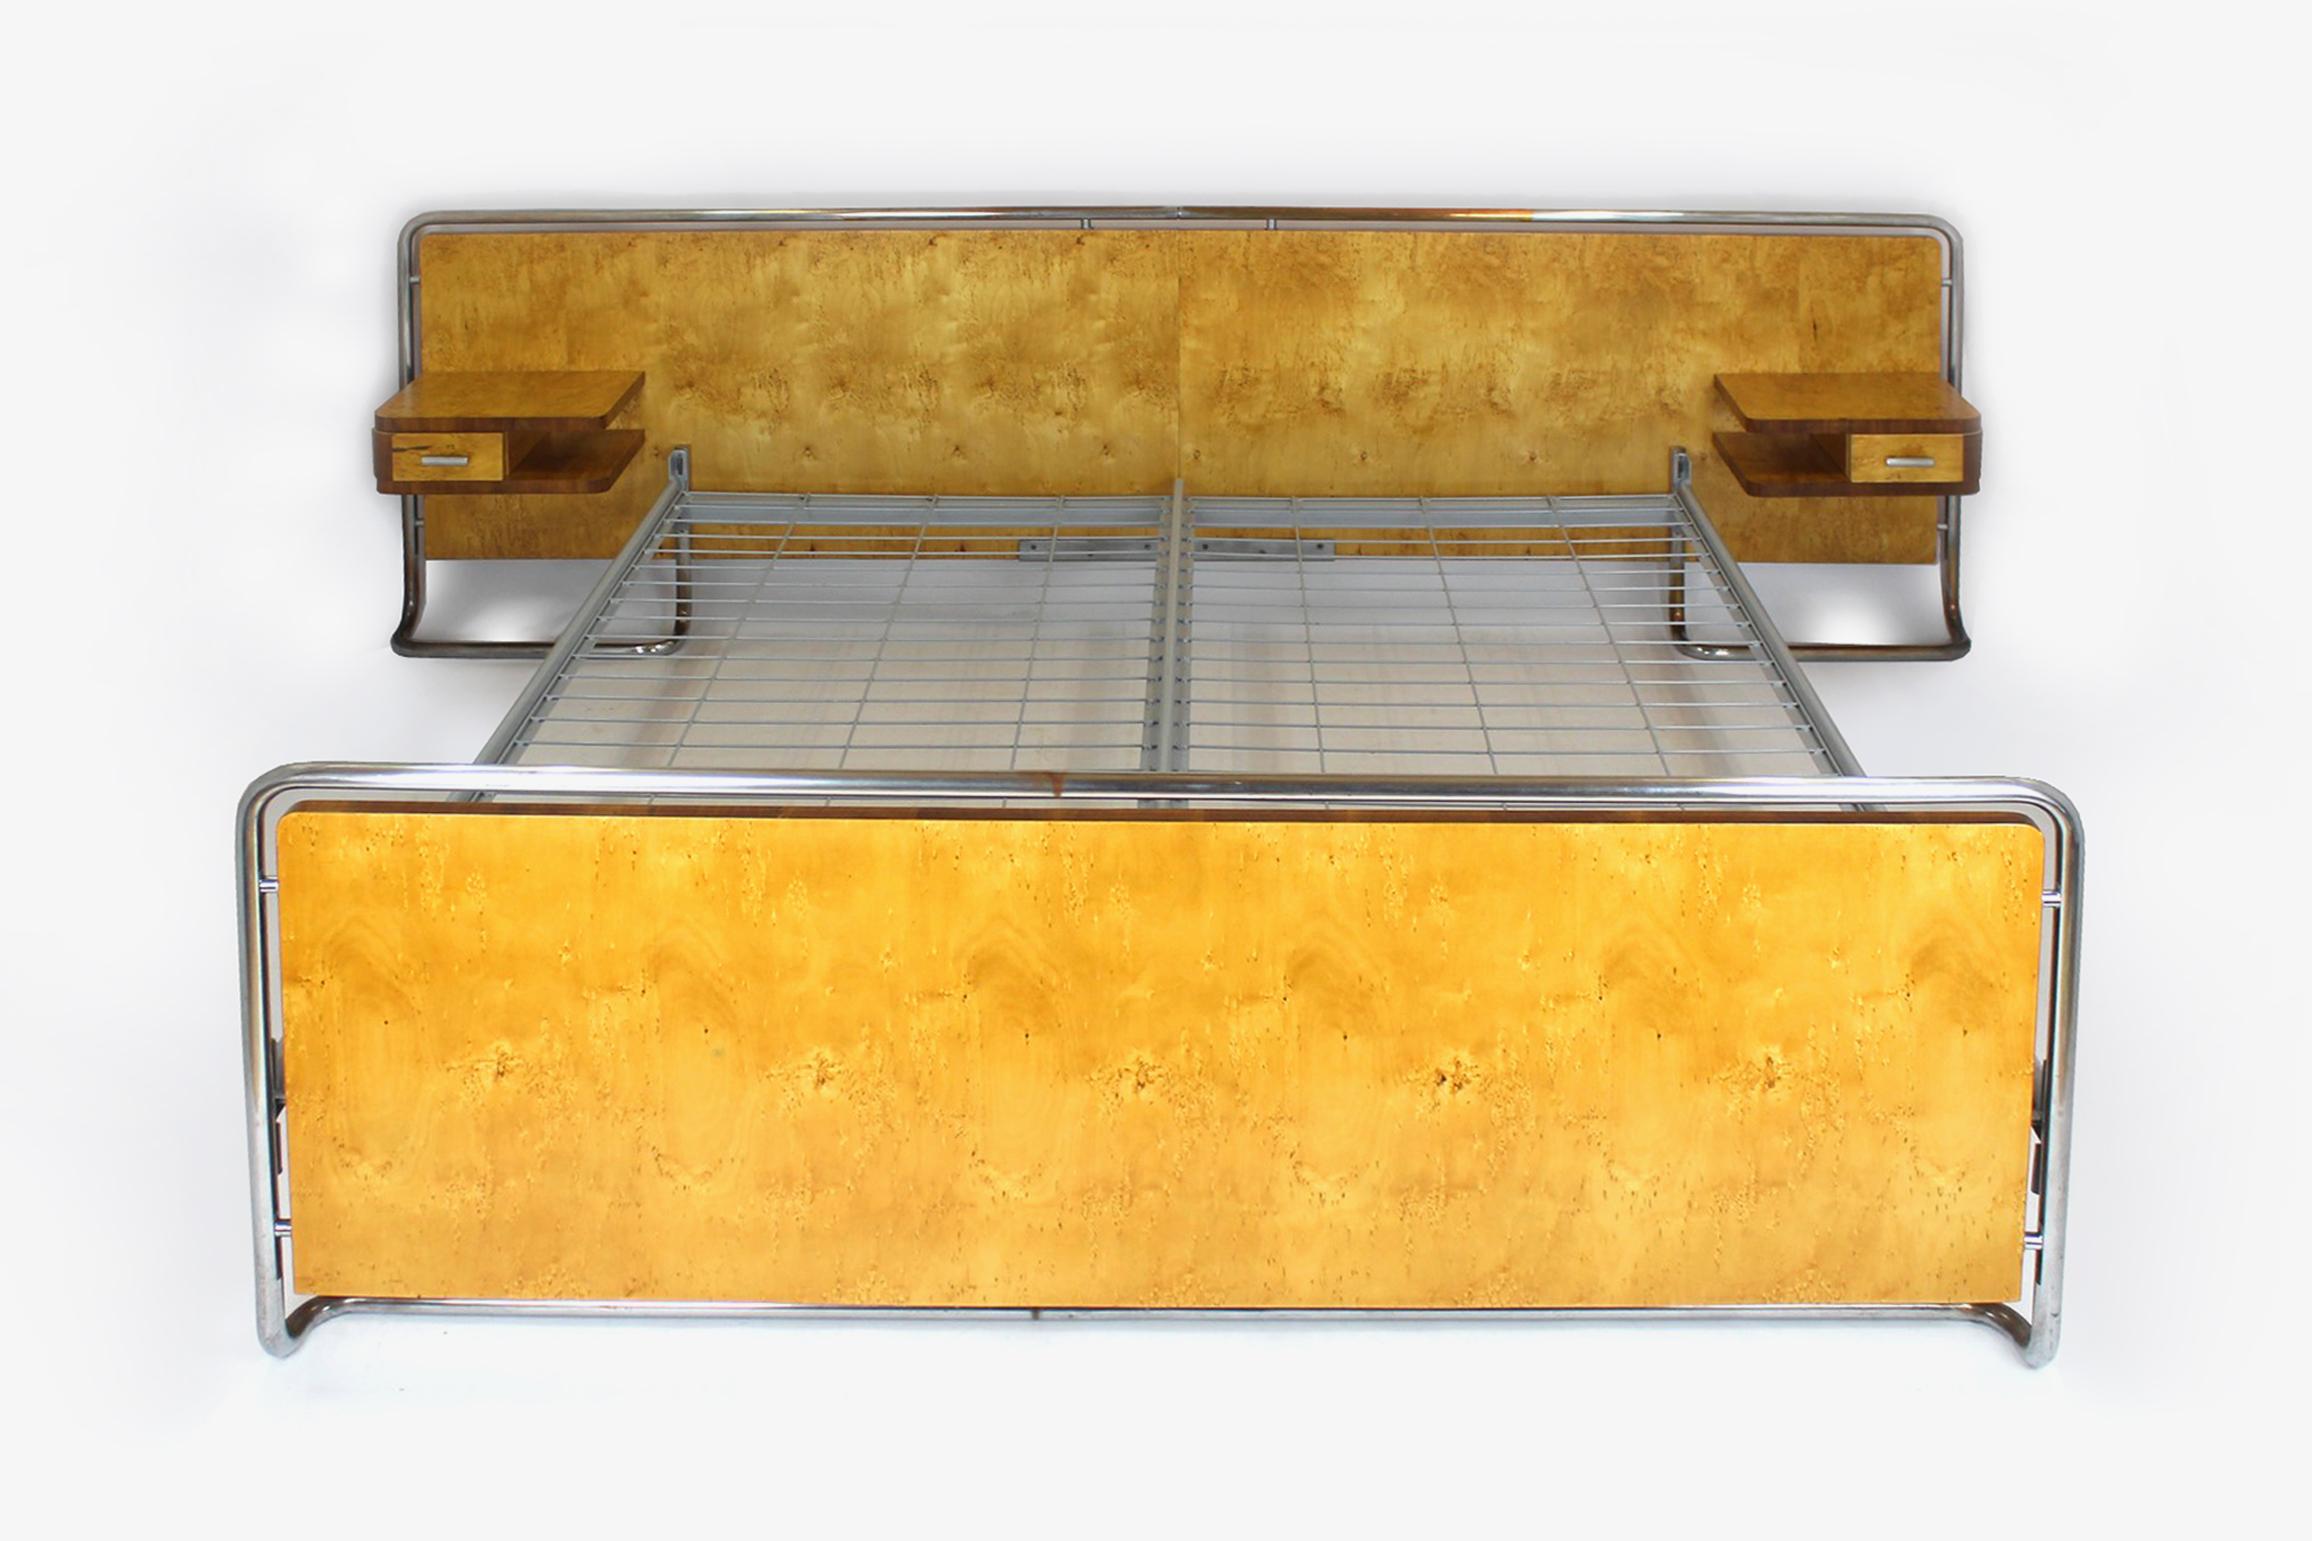 
This Bauhaus style bed was produced by Rudolf Vichr in the 1940's in Czechoslovakia.
The set consists of a double bed and two suspended bedside tables. The furniture is veneered with two types of wood, the frame is made of chromed tubular